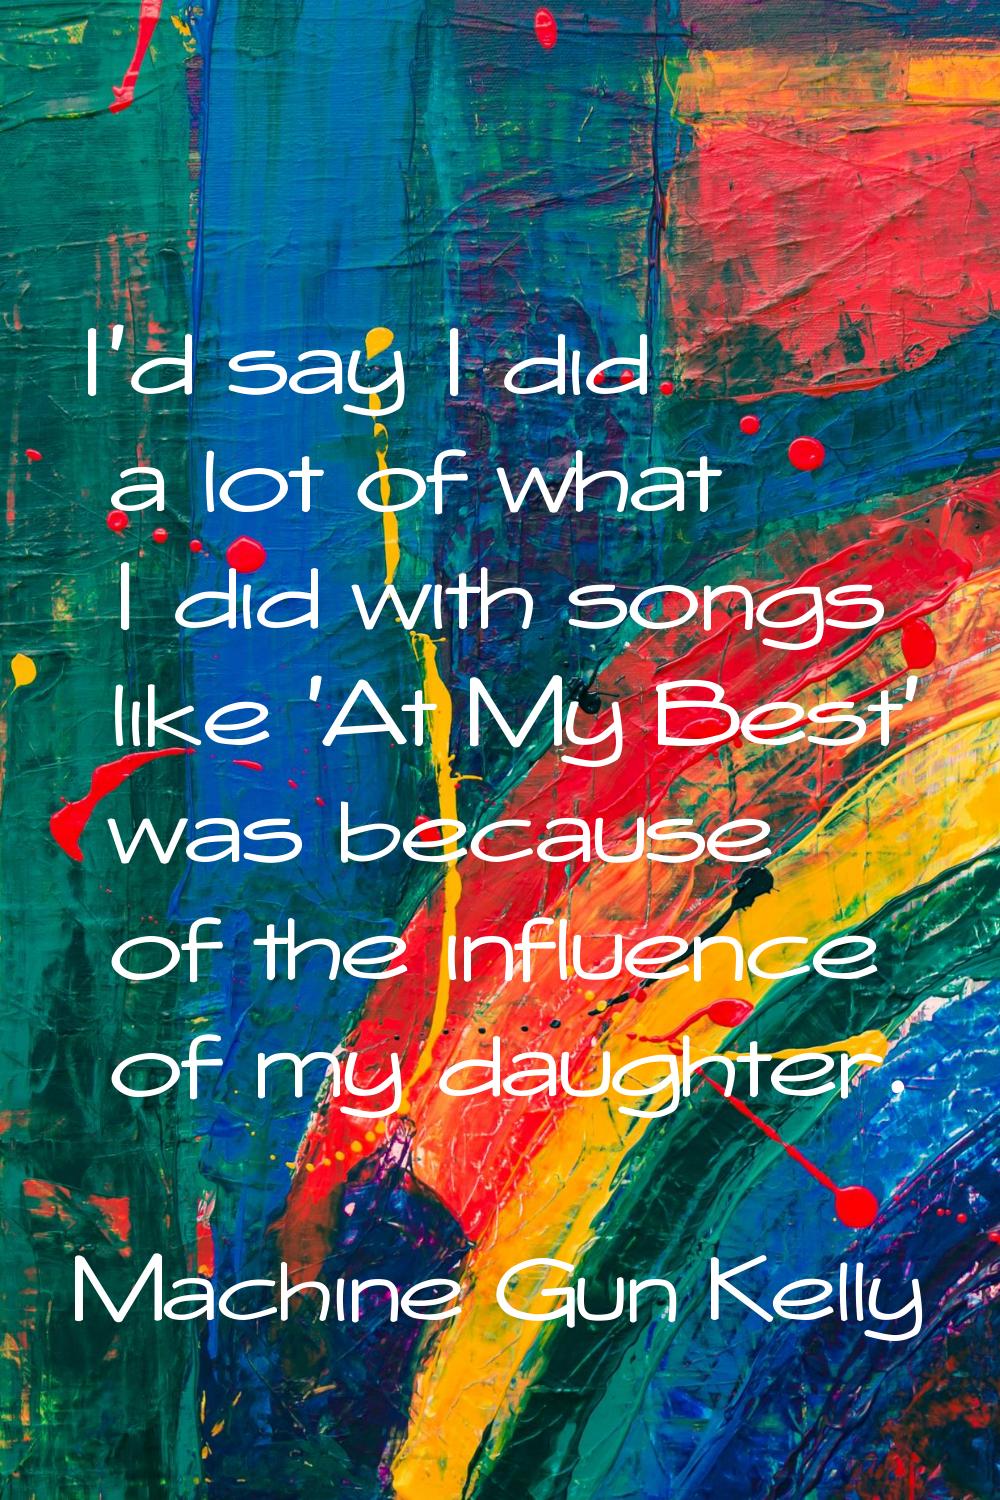 I'd say I did a lot of what I did with songs like 'At My Best' was because of the influence of my d